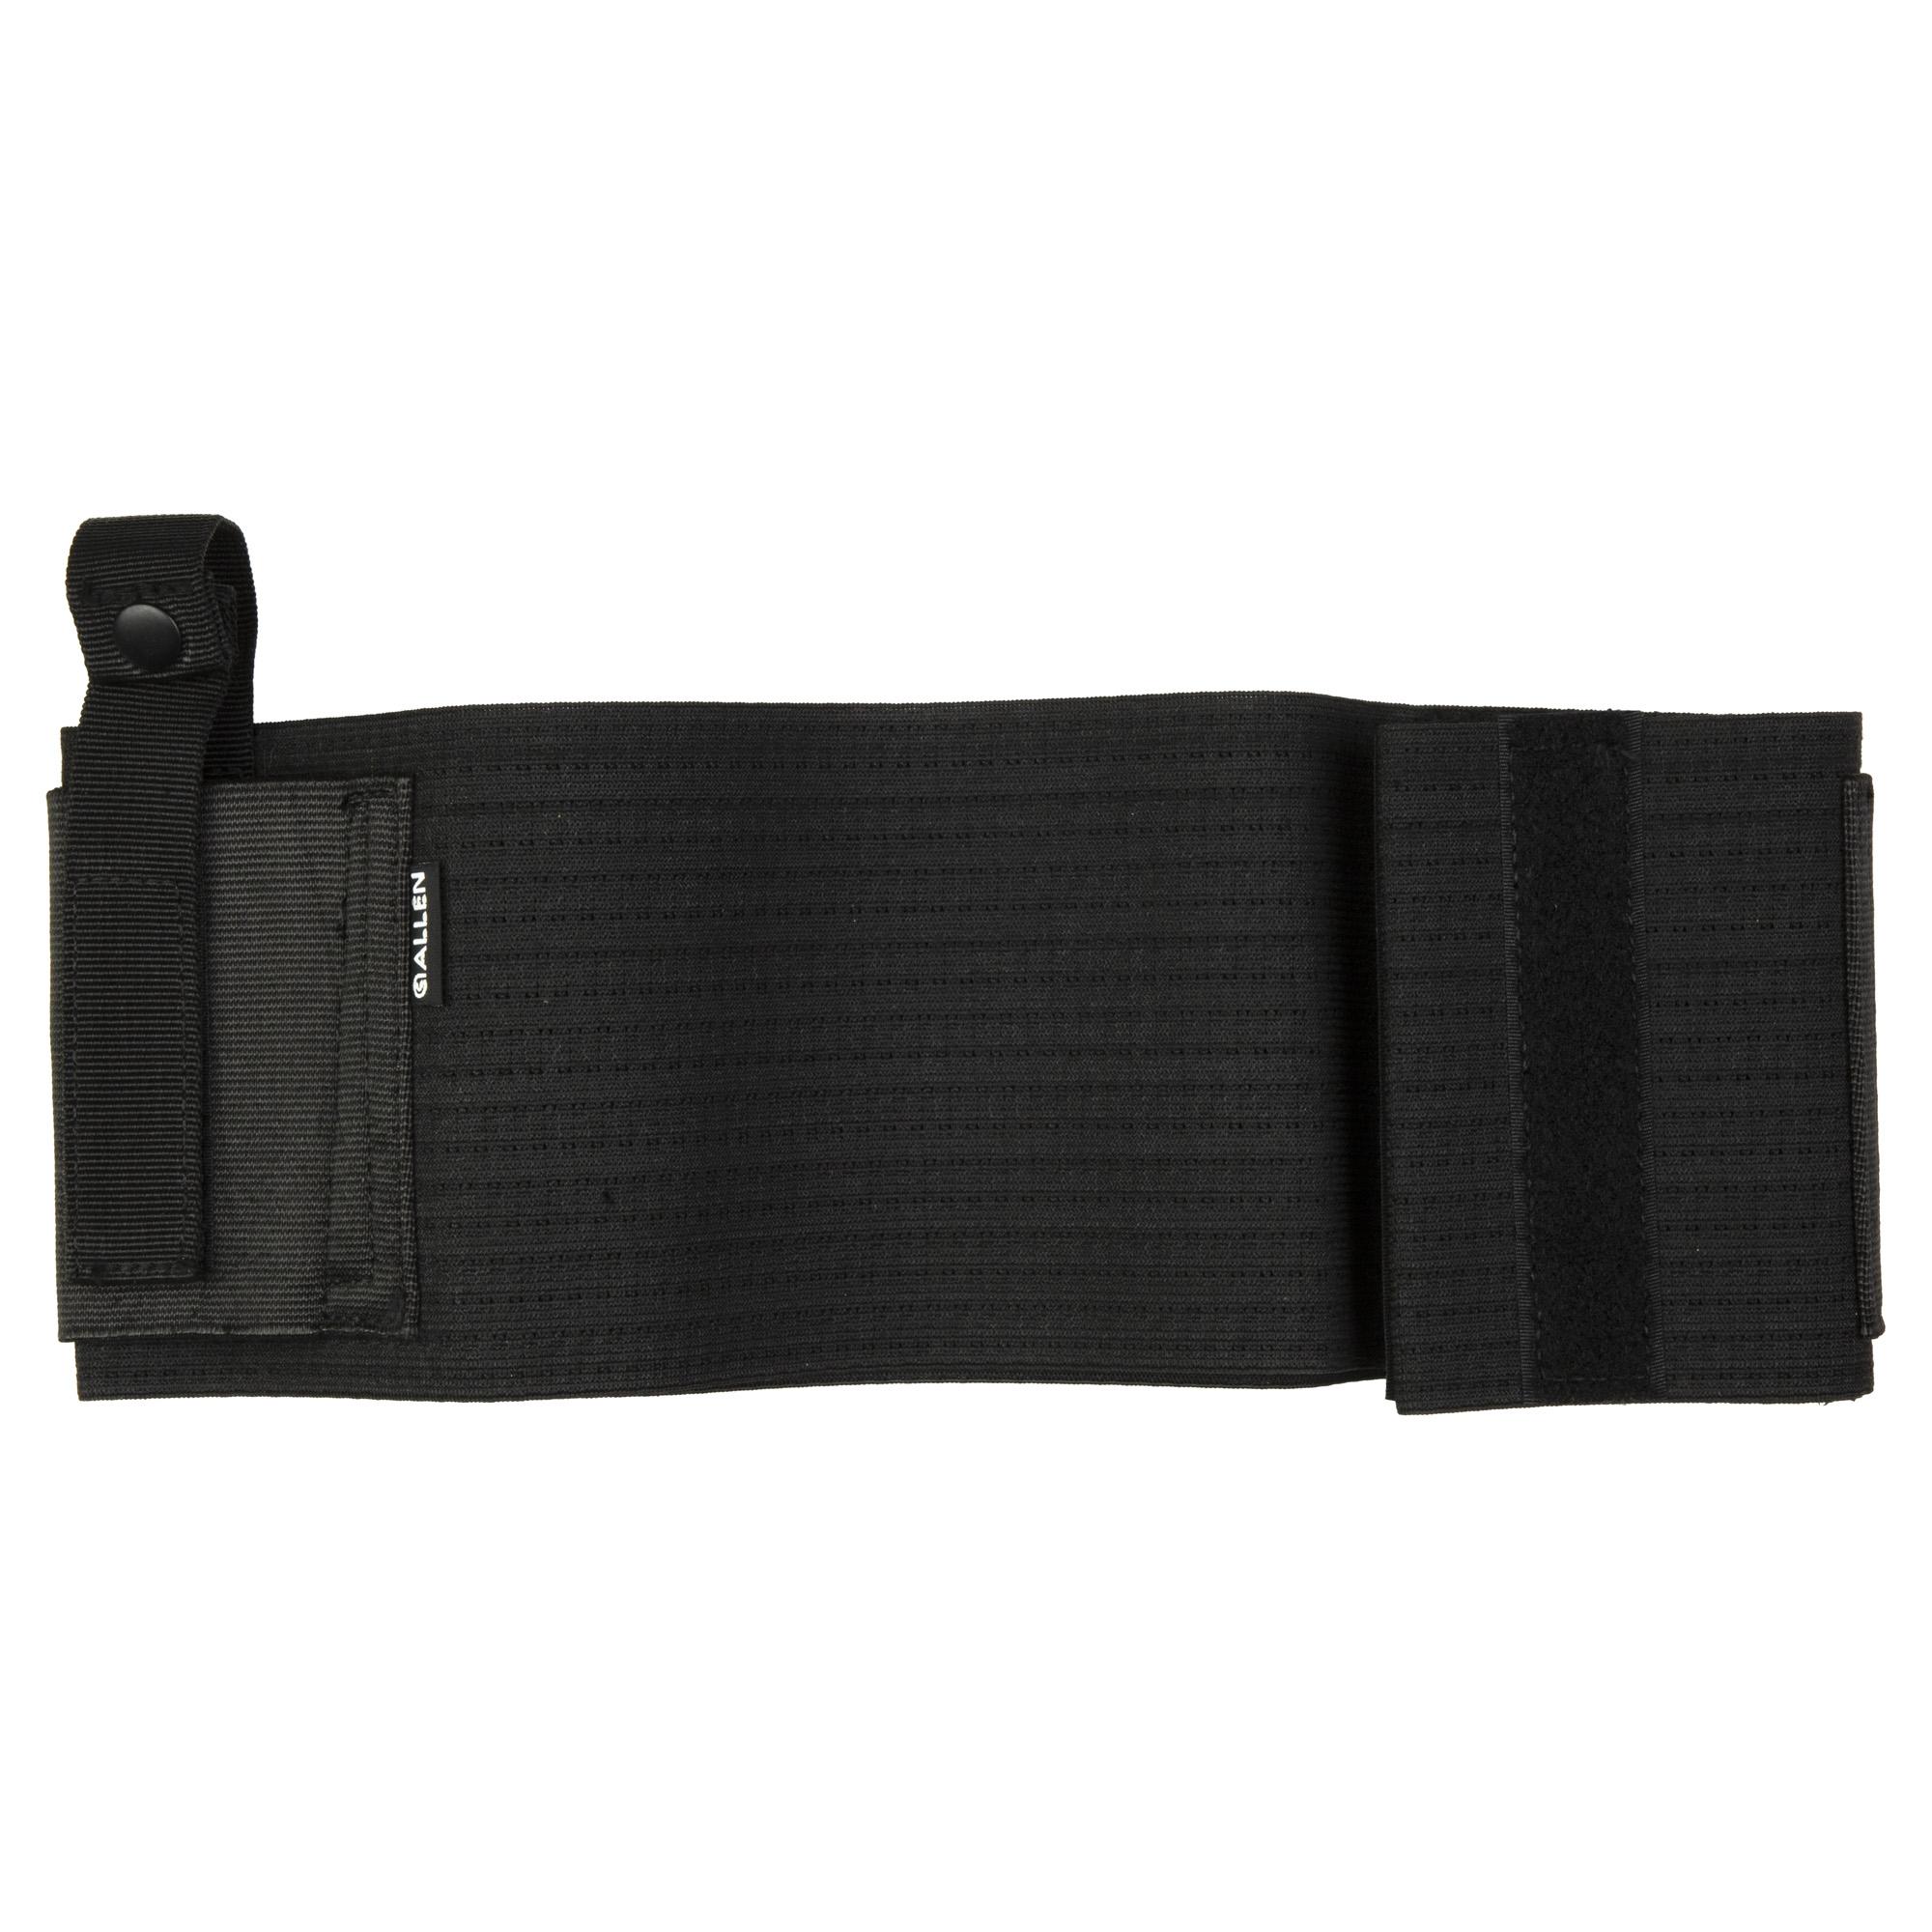 Allen Hideout Belly Band Holster - 4Shooters